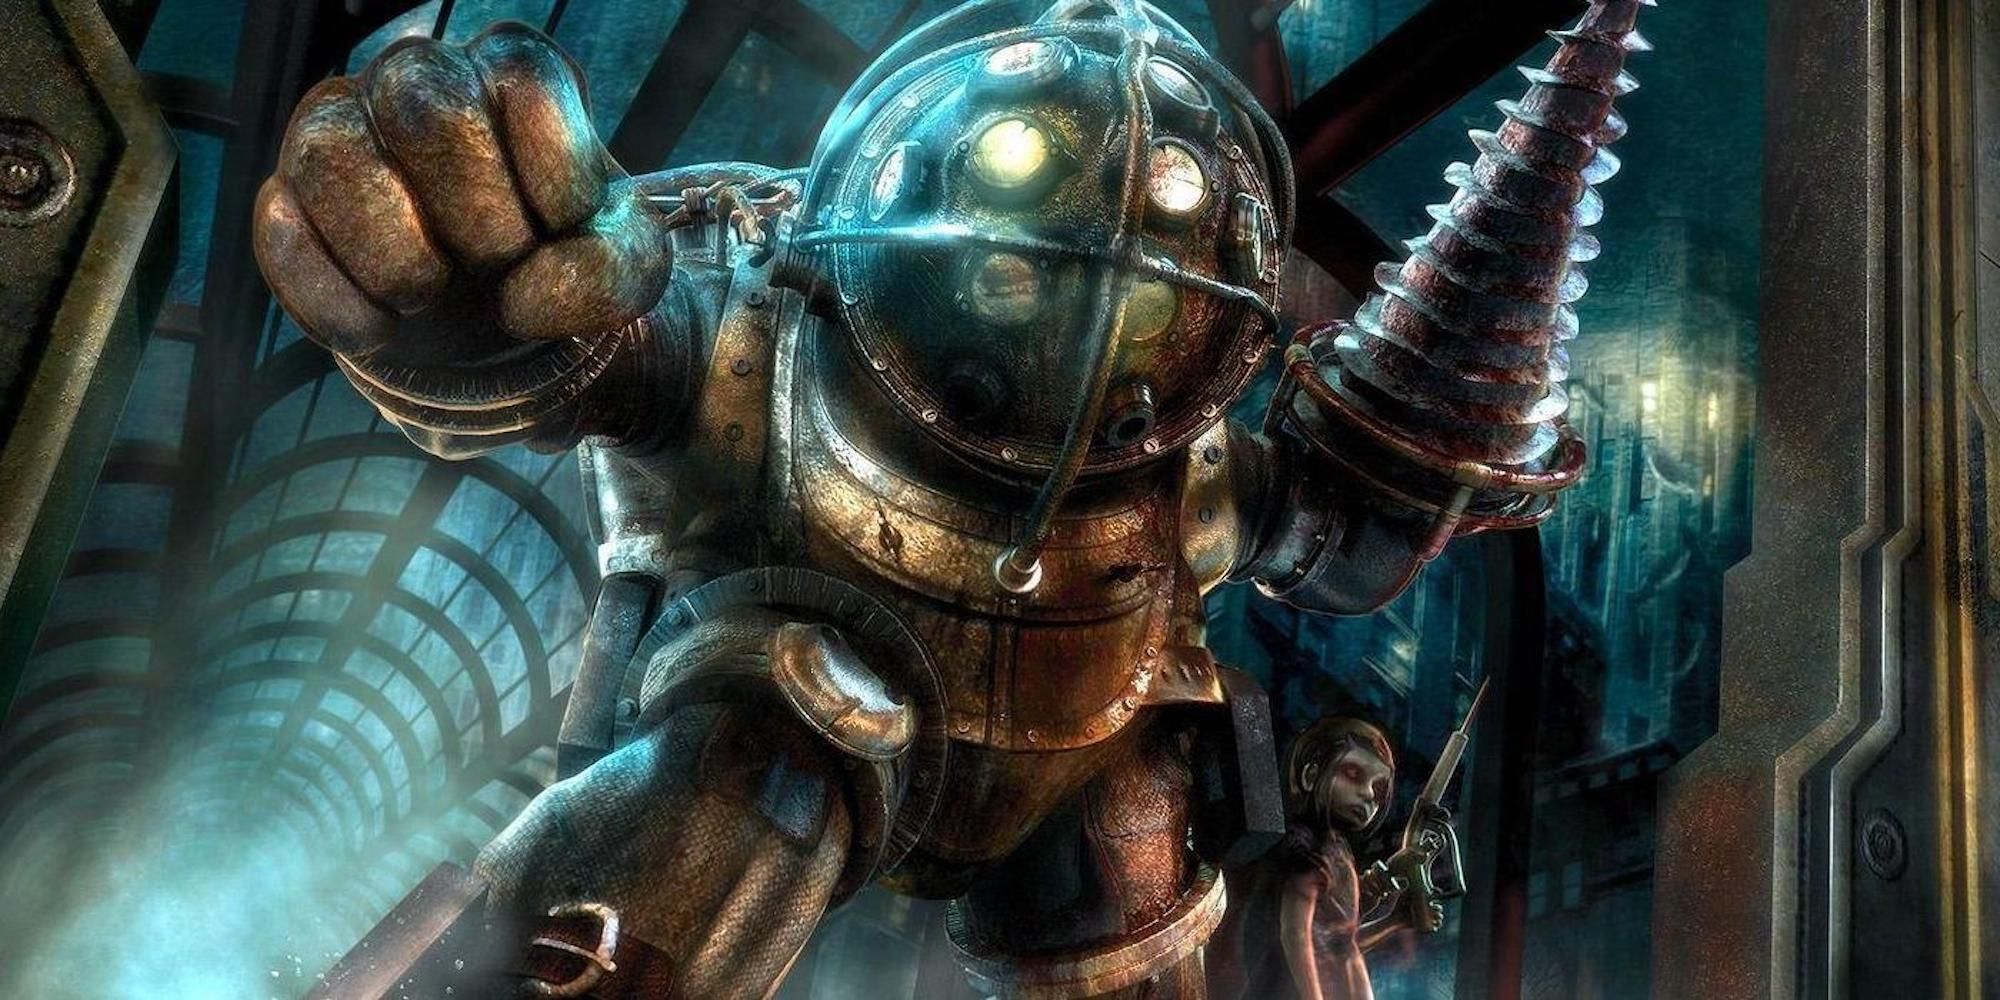 The big daddy from BioShock